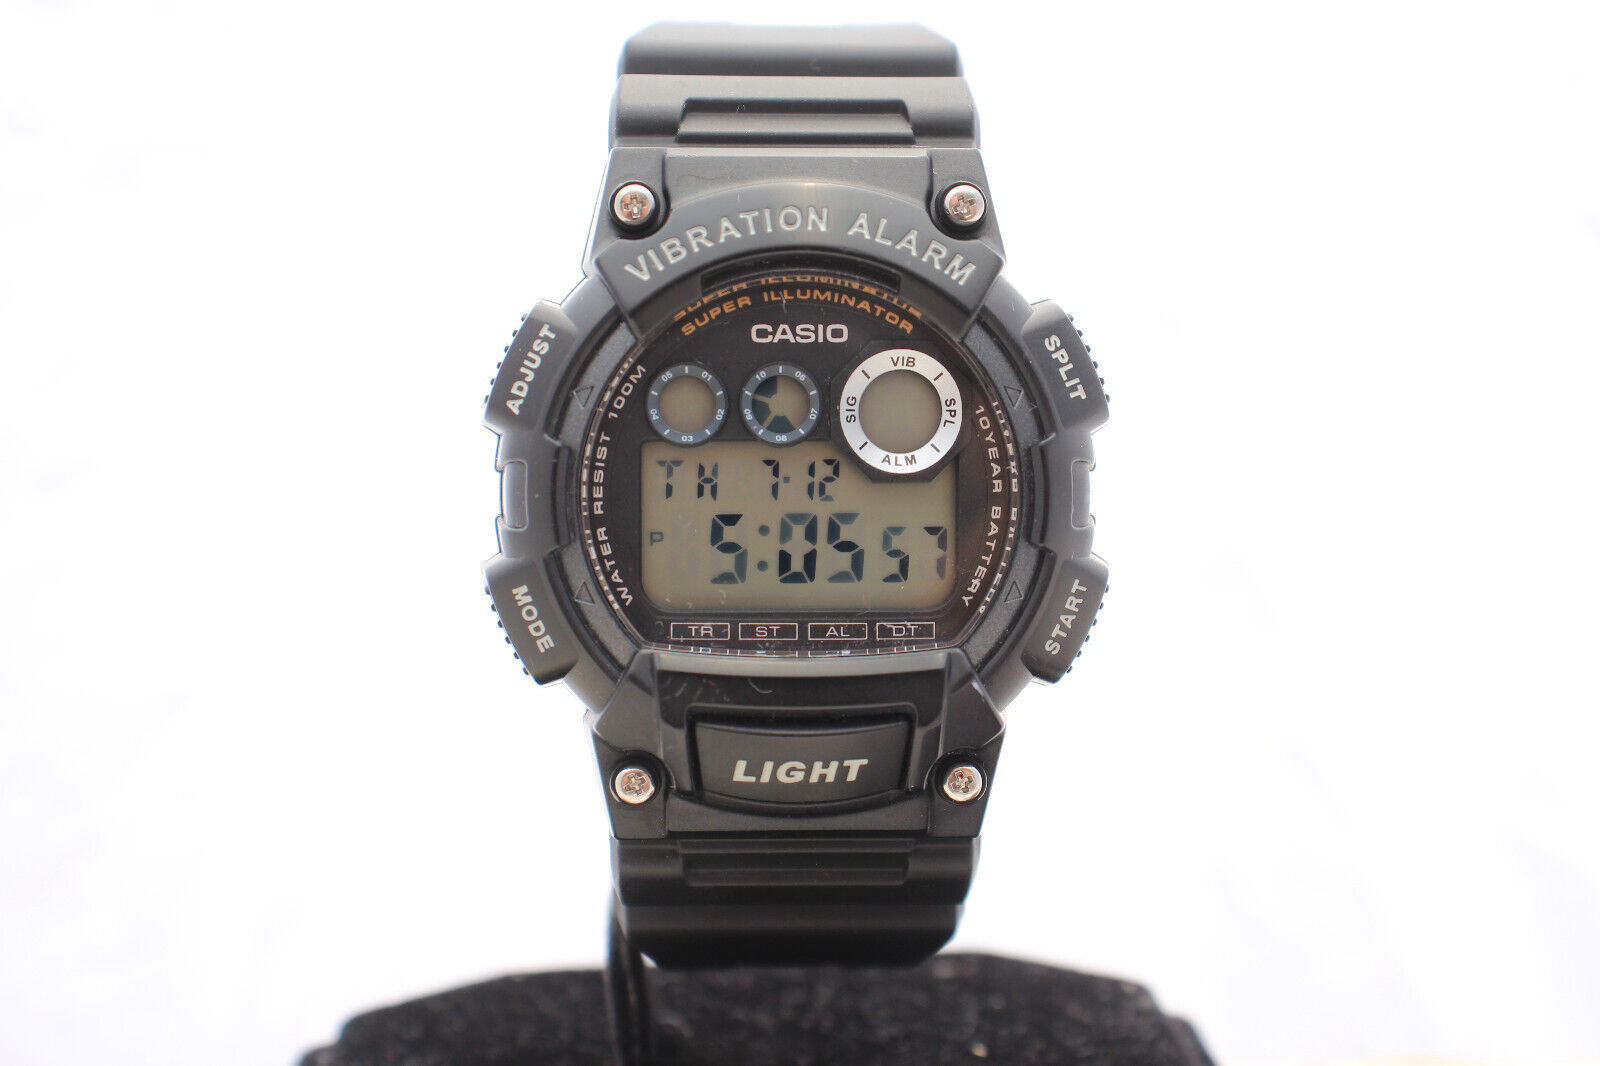 Casio G-Shock Classic Black Watch with Vibrating Alarm and World